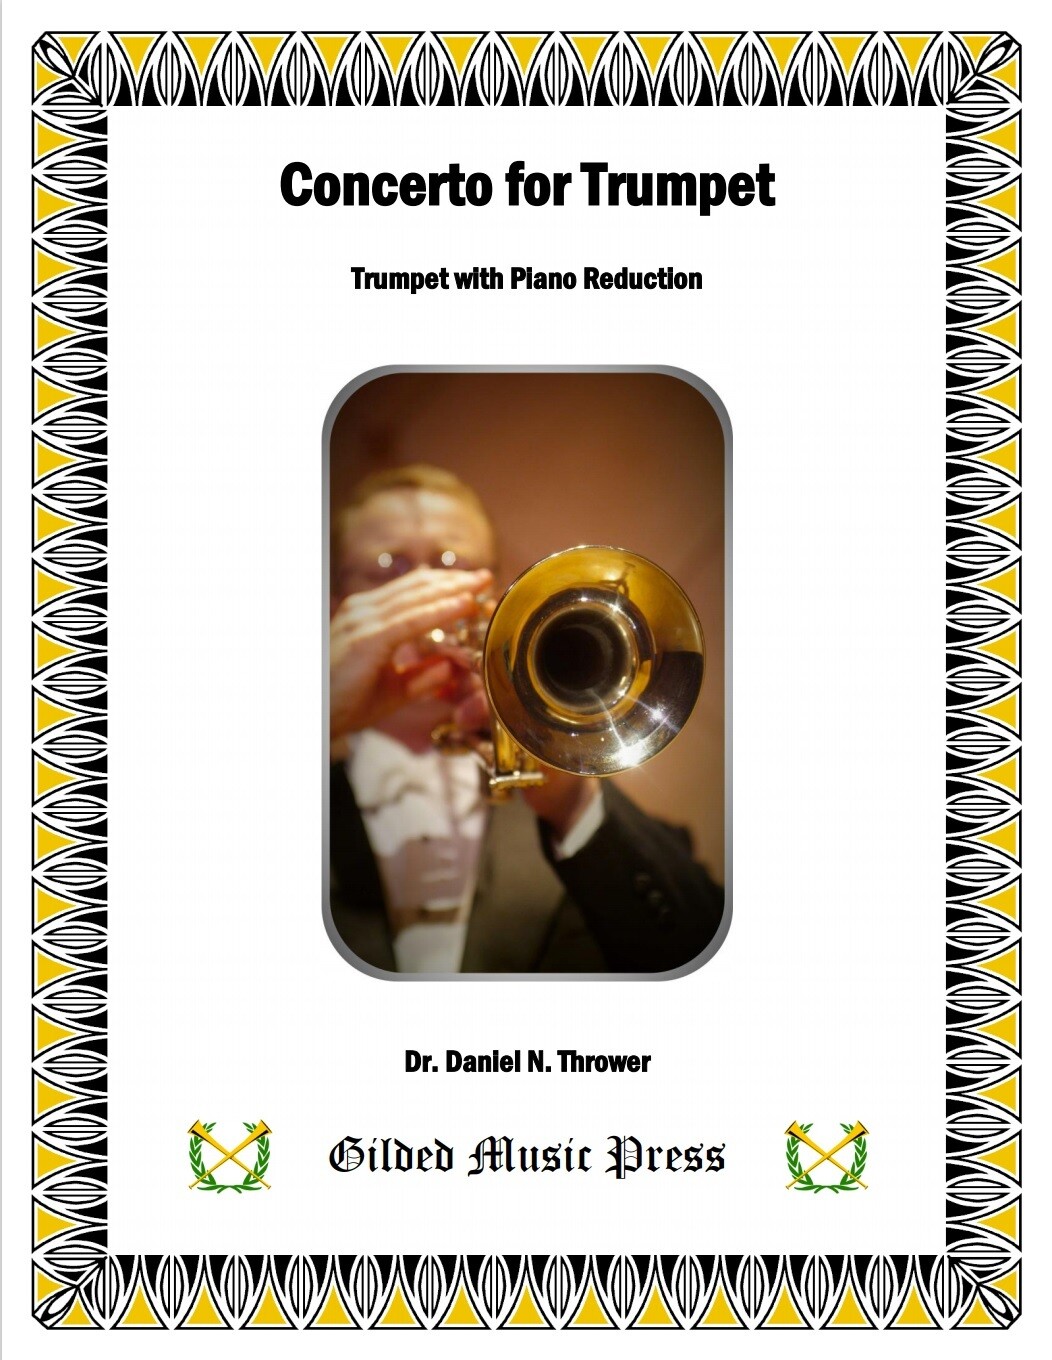 GMP 1001: Concerto for Trumpet (with Piano), Dr. Daniel Thrower